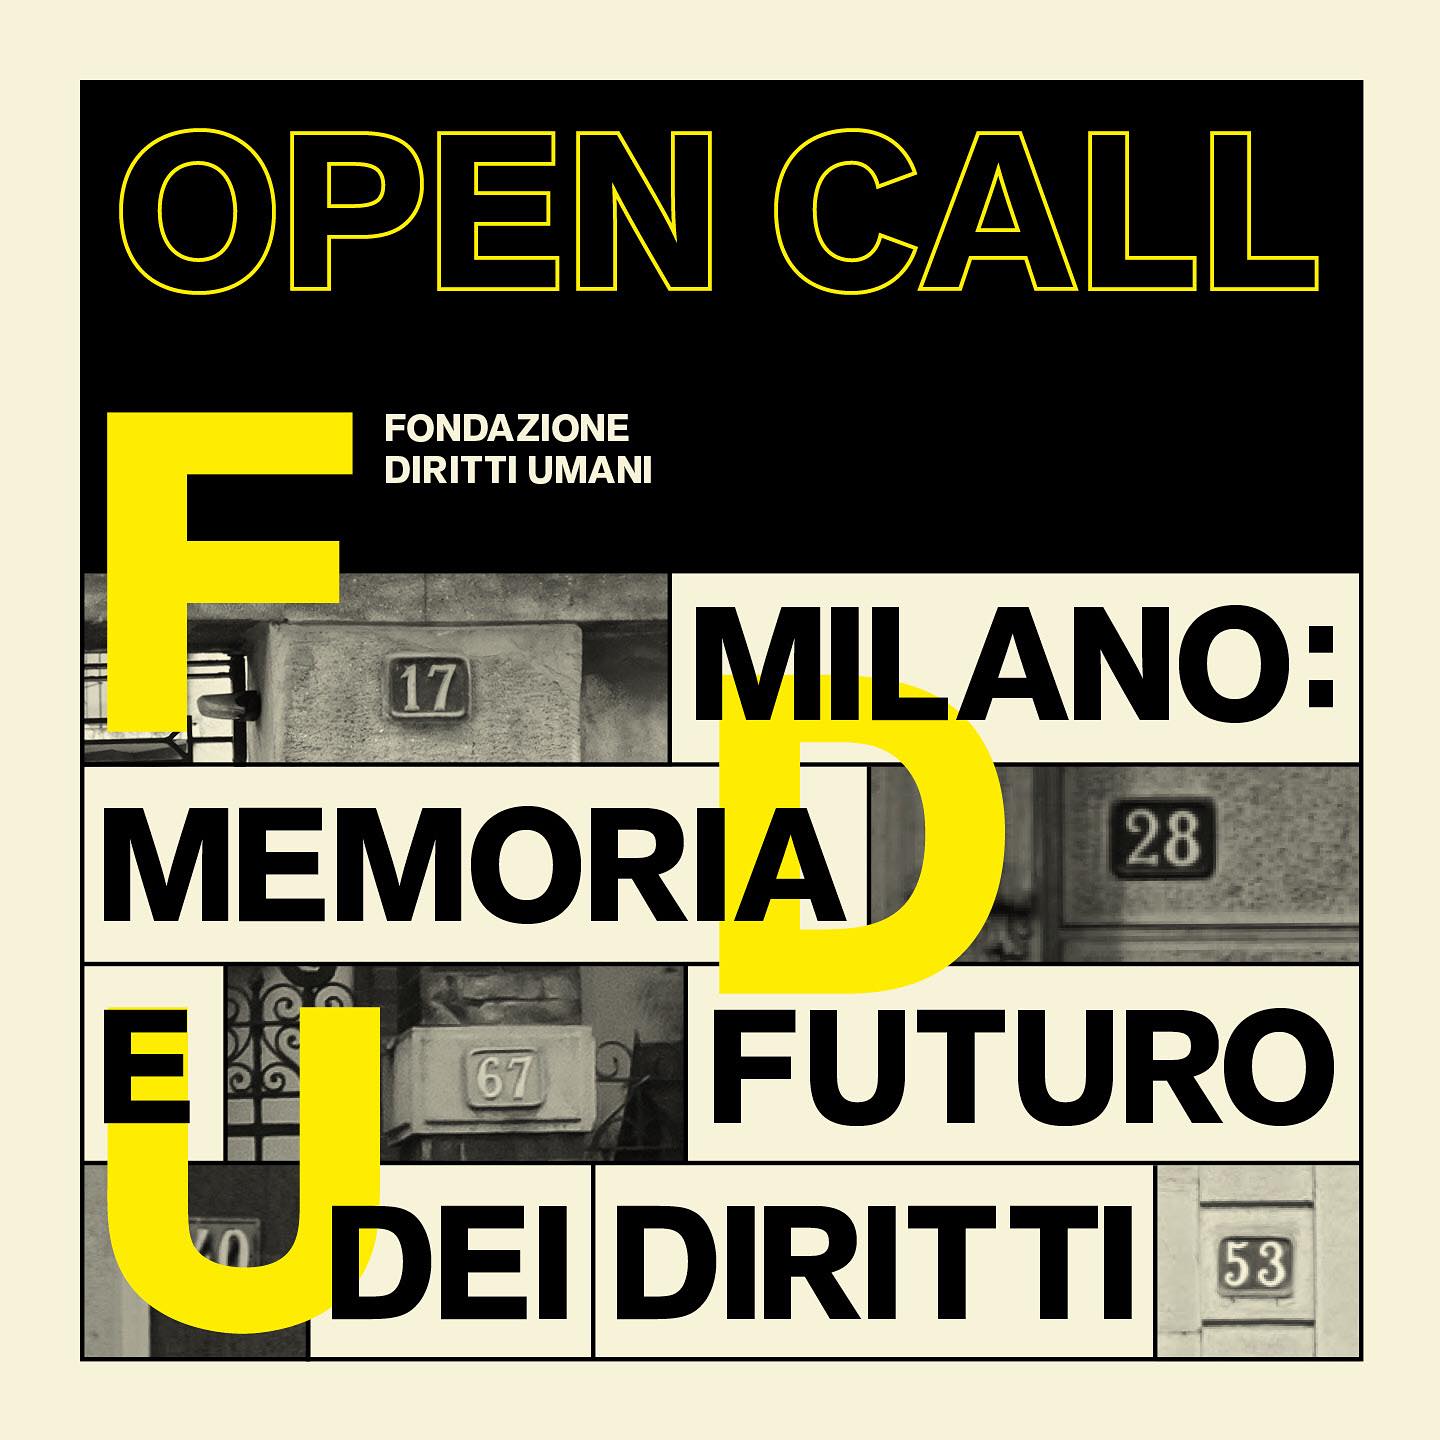 Milan: memory and future of rights - Human Rights Foundation